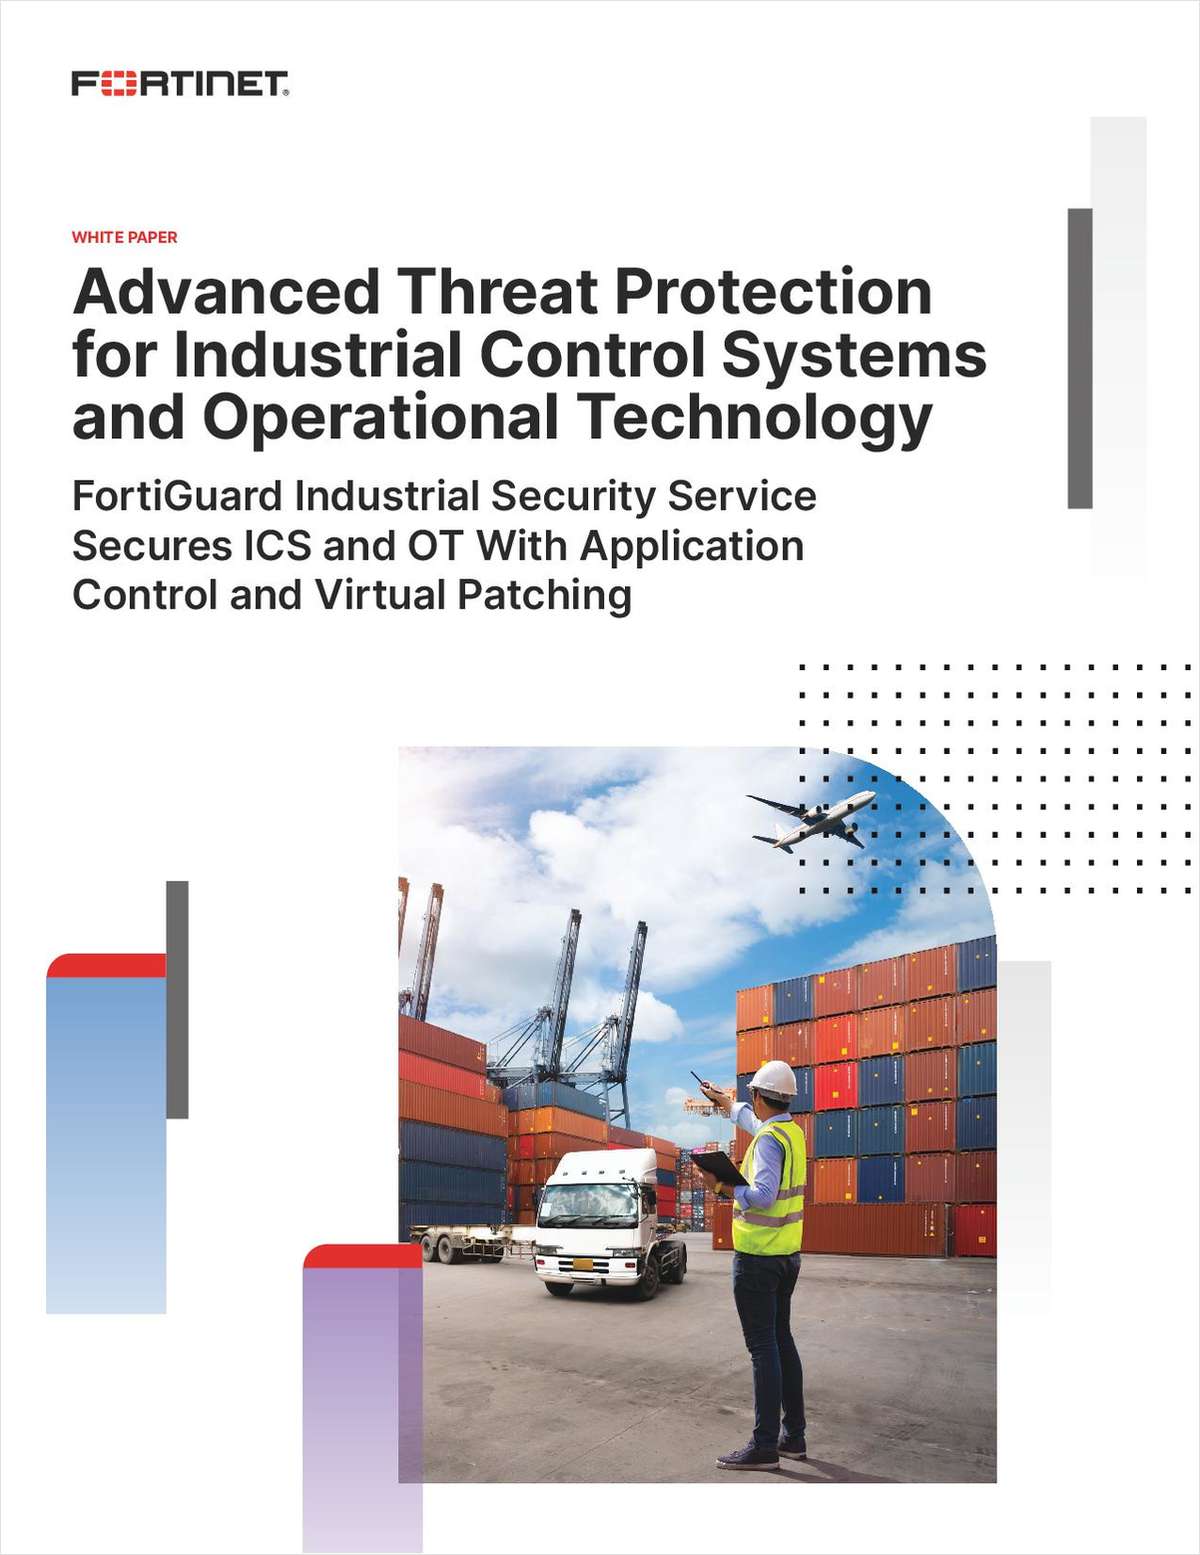 Advanced Threat Protection for Industrial Control Systems and Operational Technology